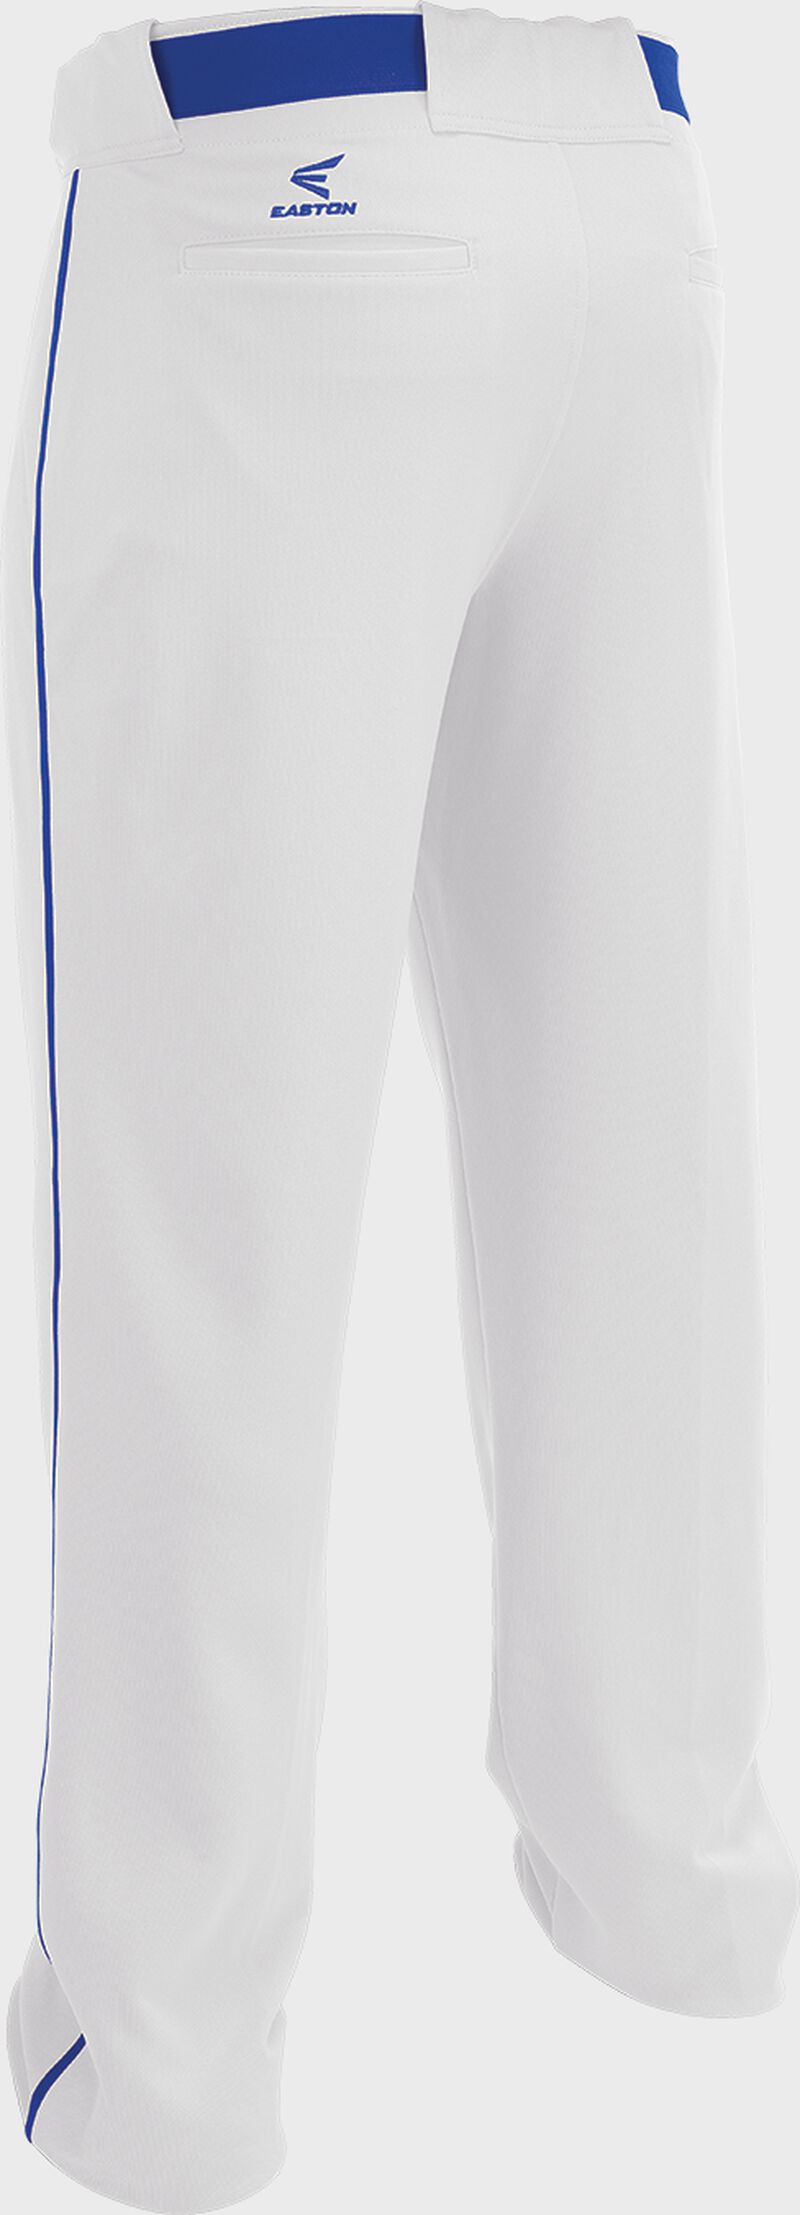 RIVAL 2 PIPED PANT WHRY L